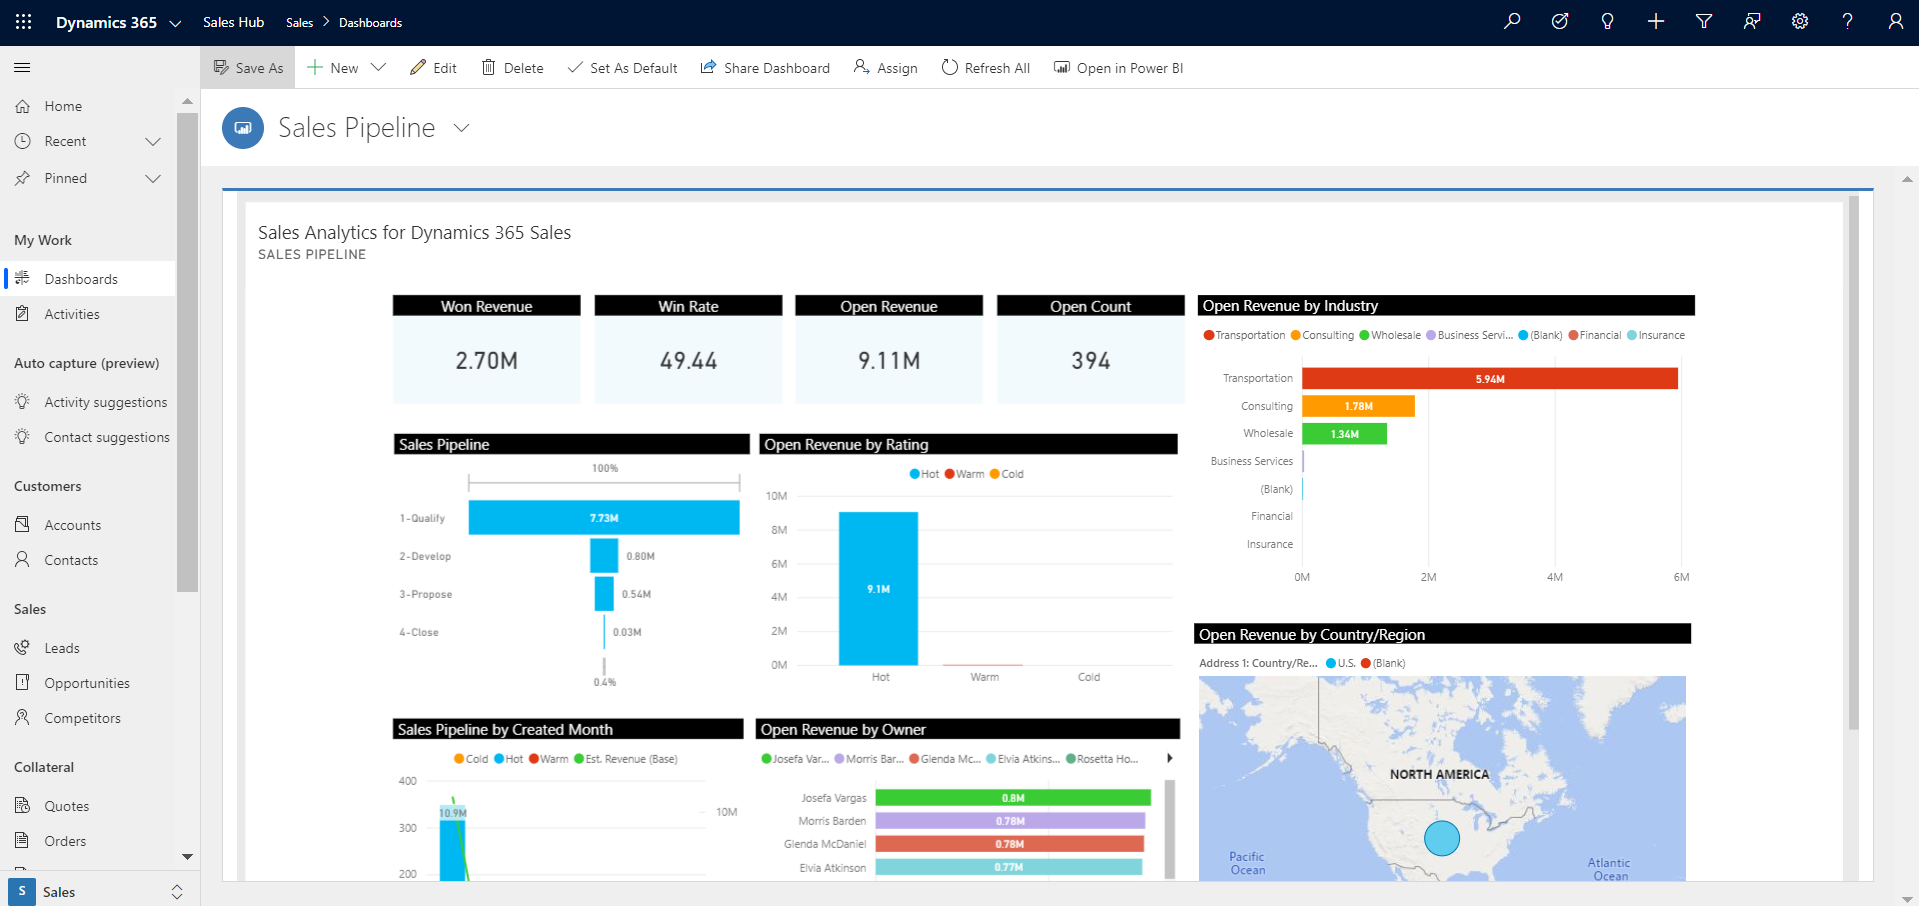 Microsoft Dynamics 365 Dashboard for Sales Hub - Small businesses can understand the growth of their sales operations and find opportunity for growth